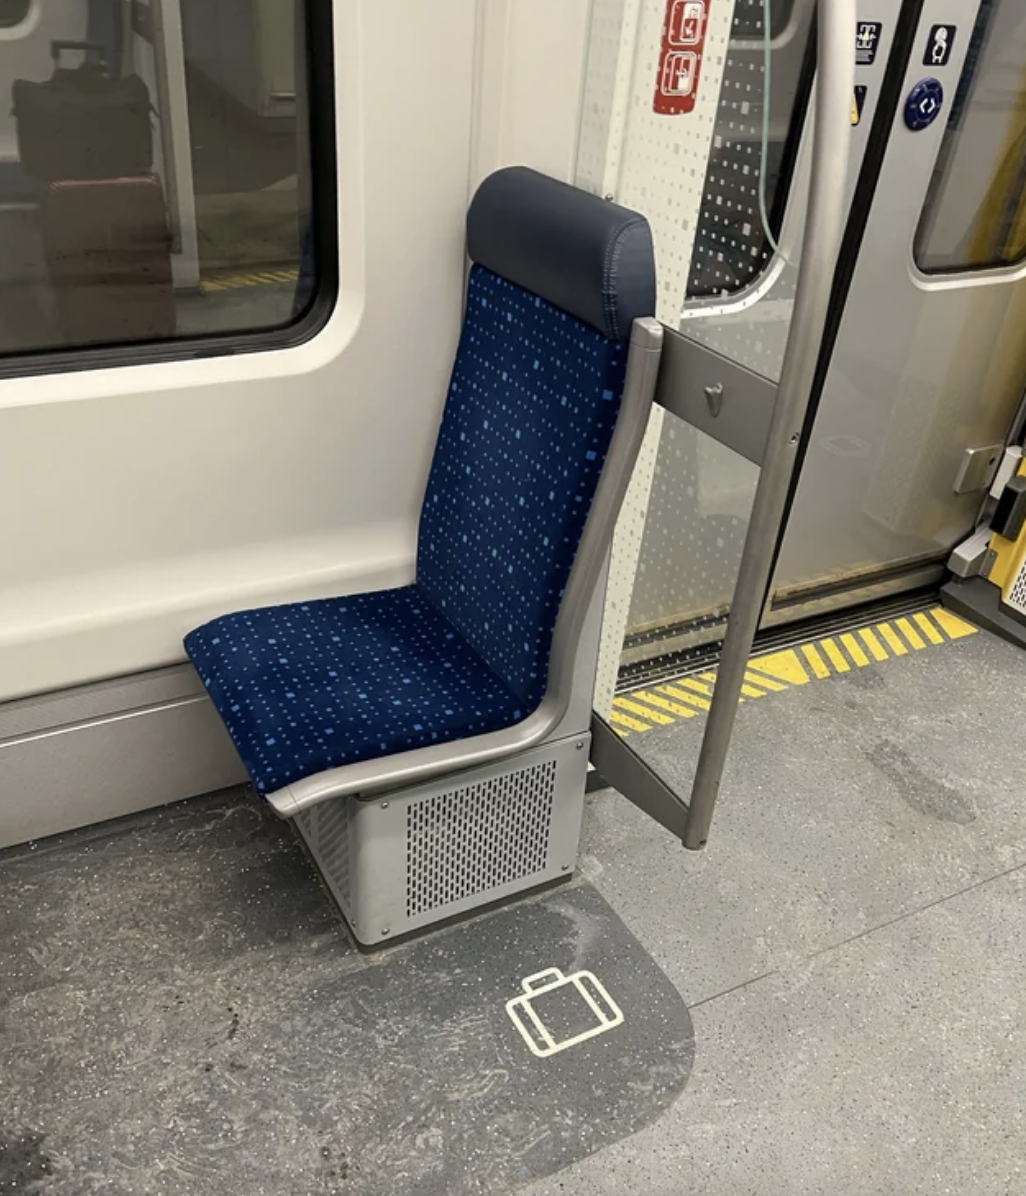 The floor next to a seat has a section in a different color with a suitcase icon on it